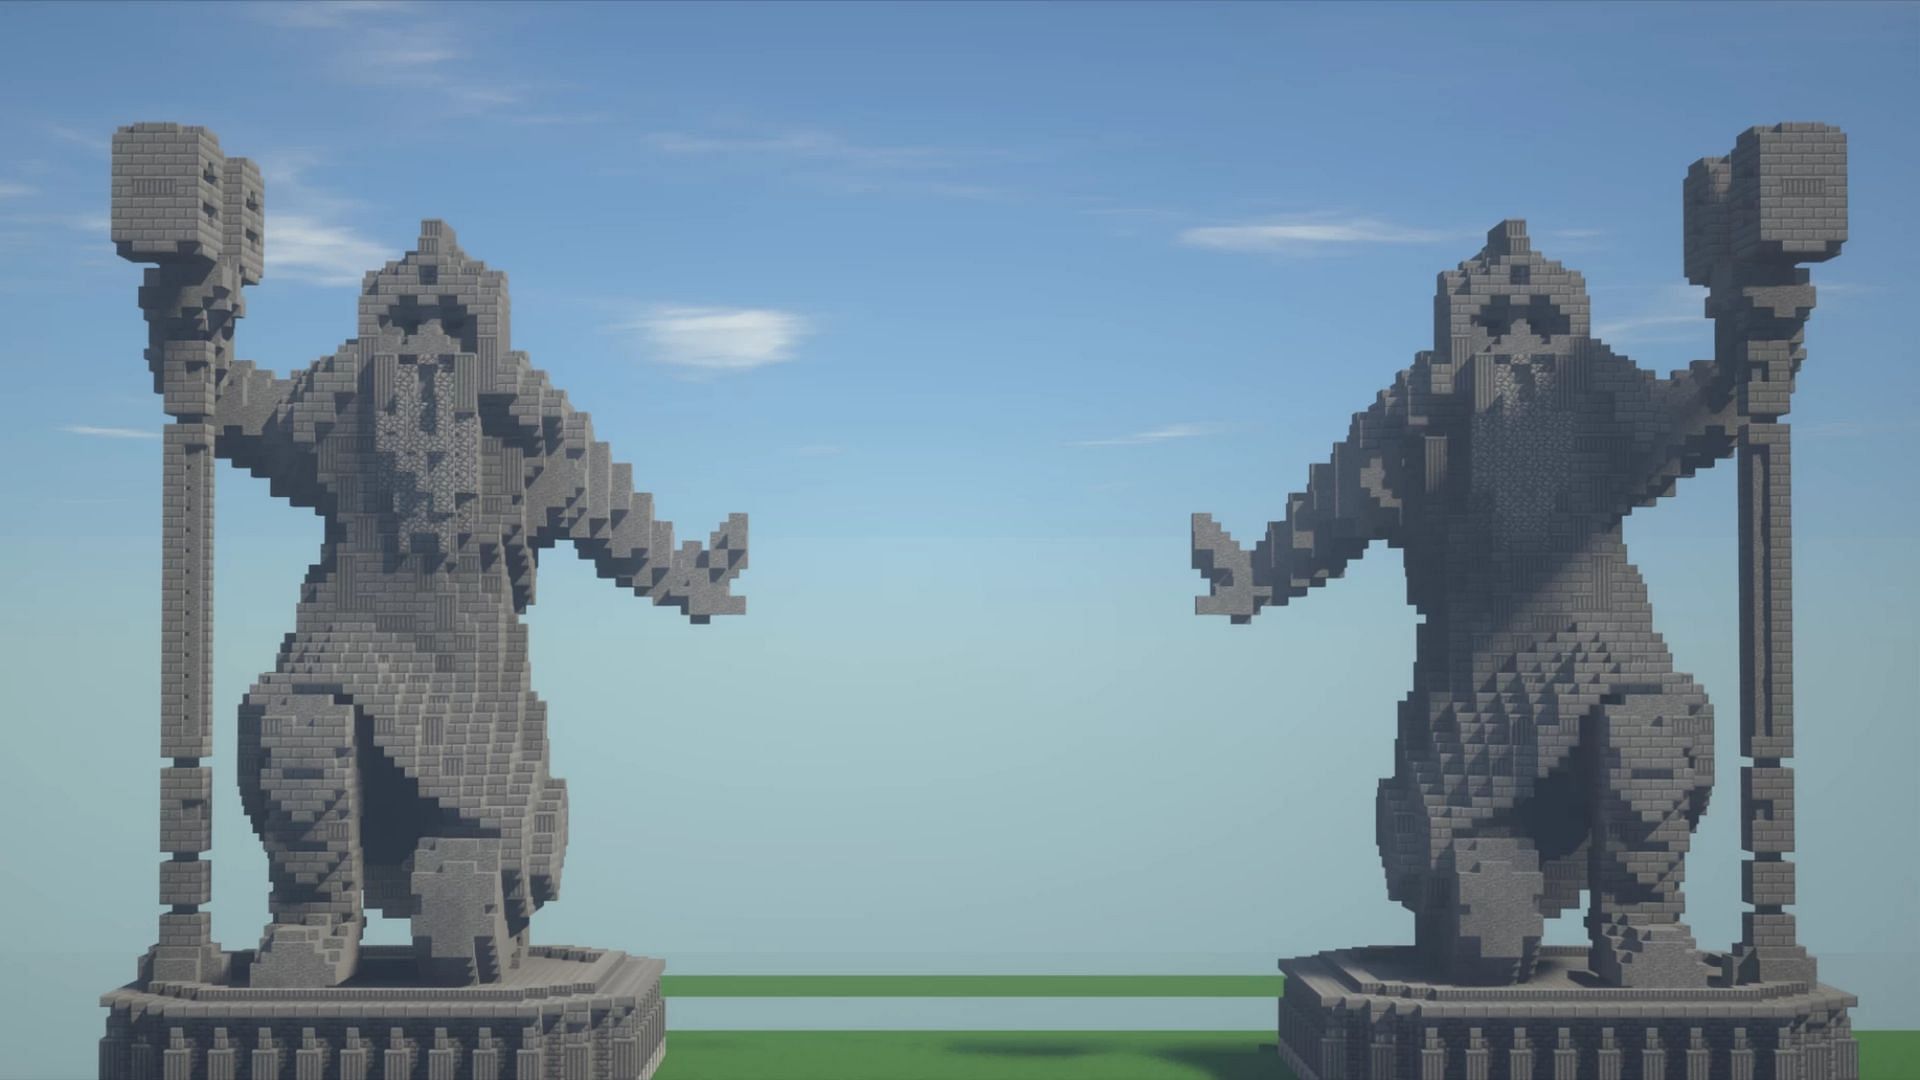 Dwarven statues will look magnificent near a mountain base (Image via PlanetMinecraft/Nishisumi)